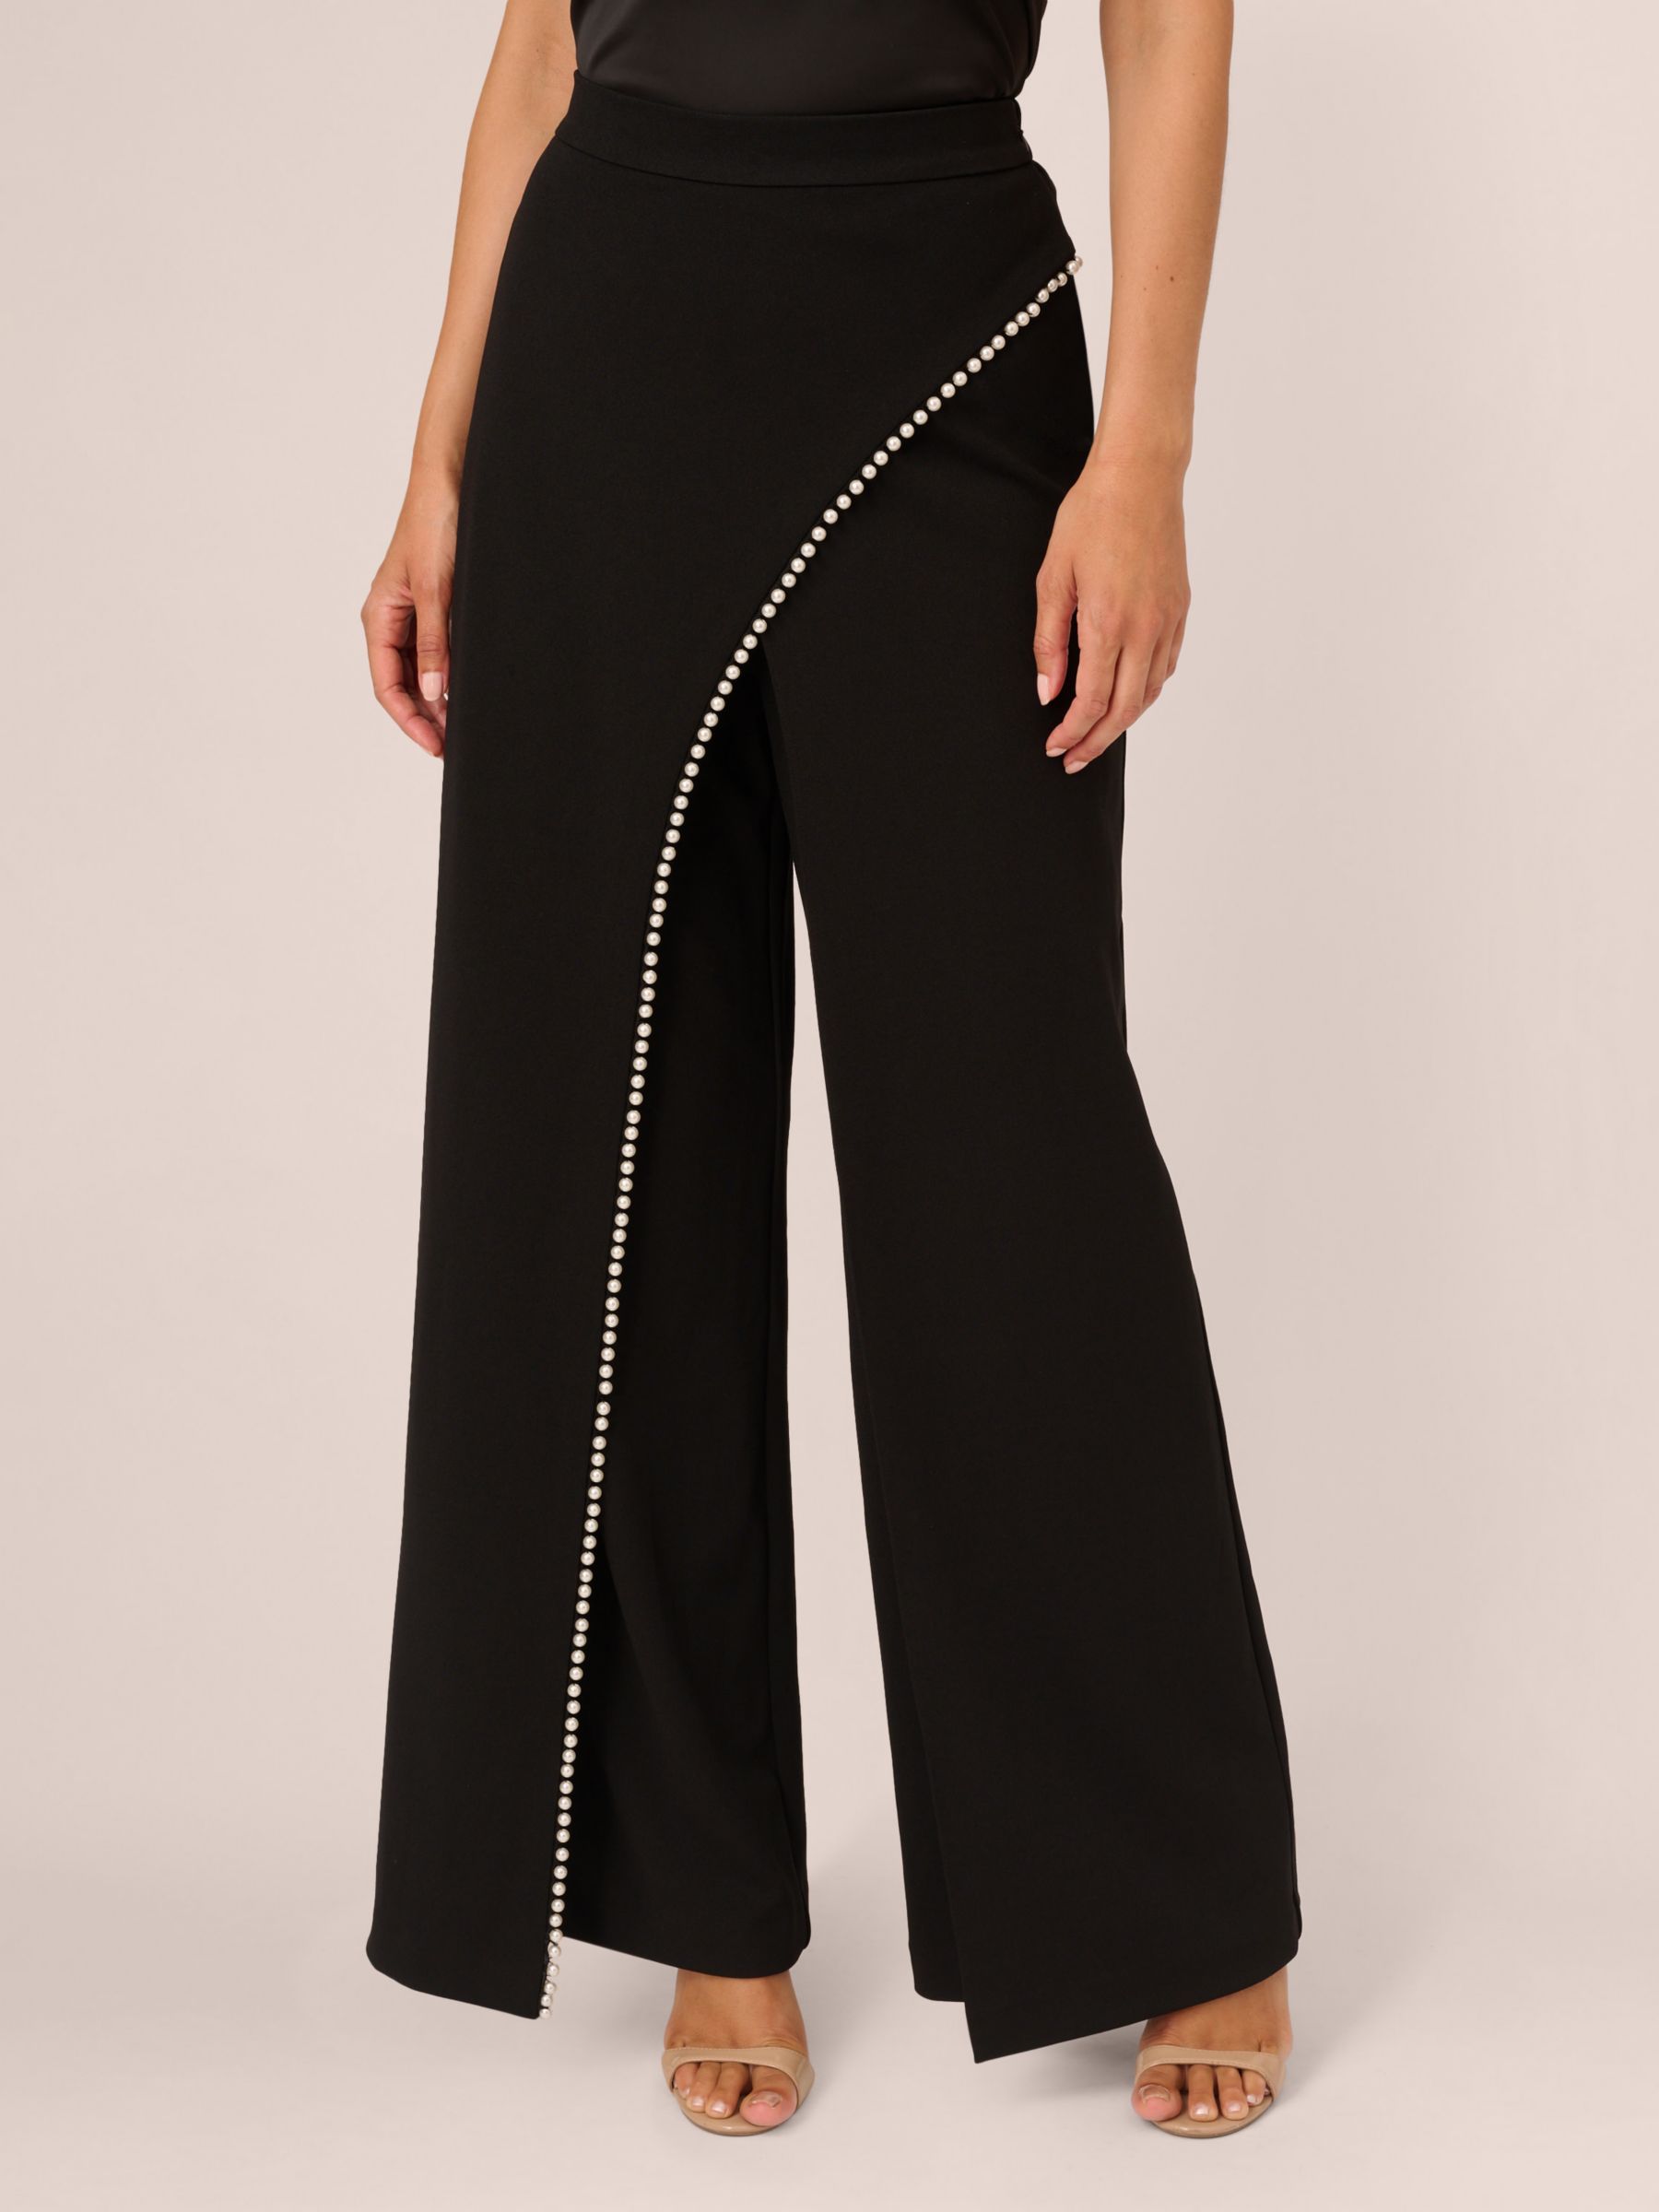 Adrianna Papell Pearl Wide Leg Crepe Trousers, Black